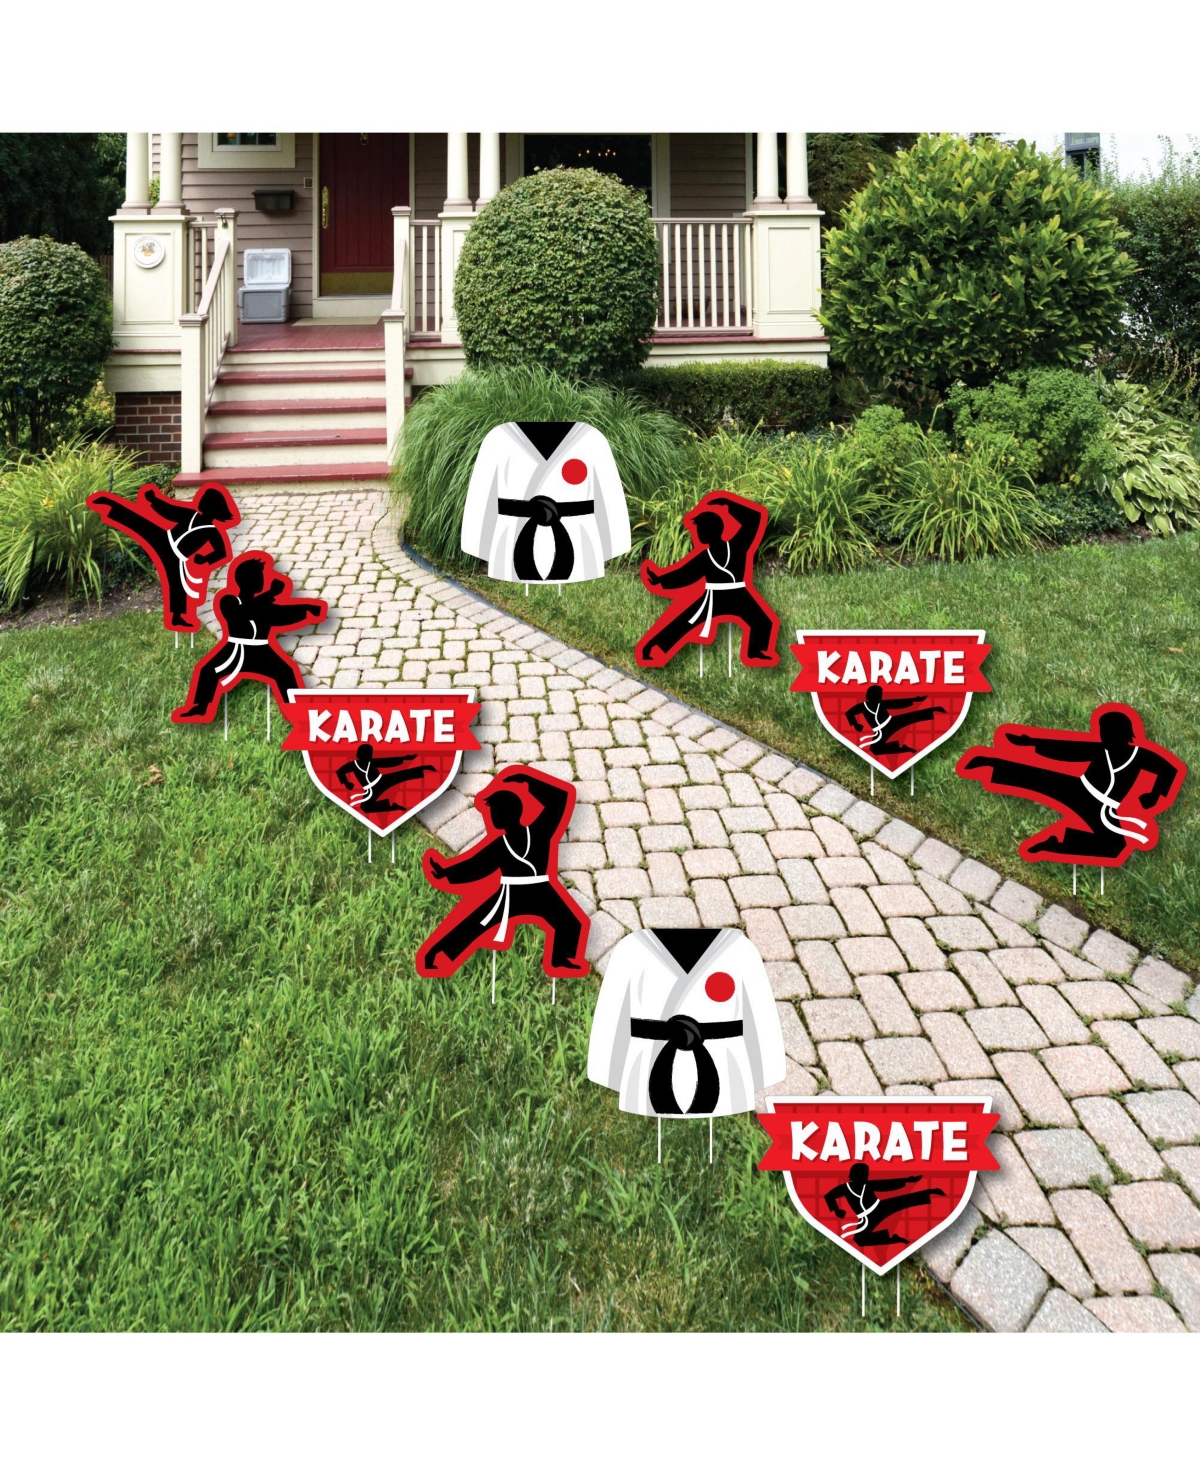 Karate Master - Outdoor Martial Arts Birthday Party Yard Decorations - 10 Pc